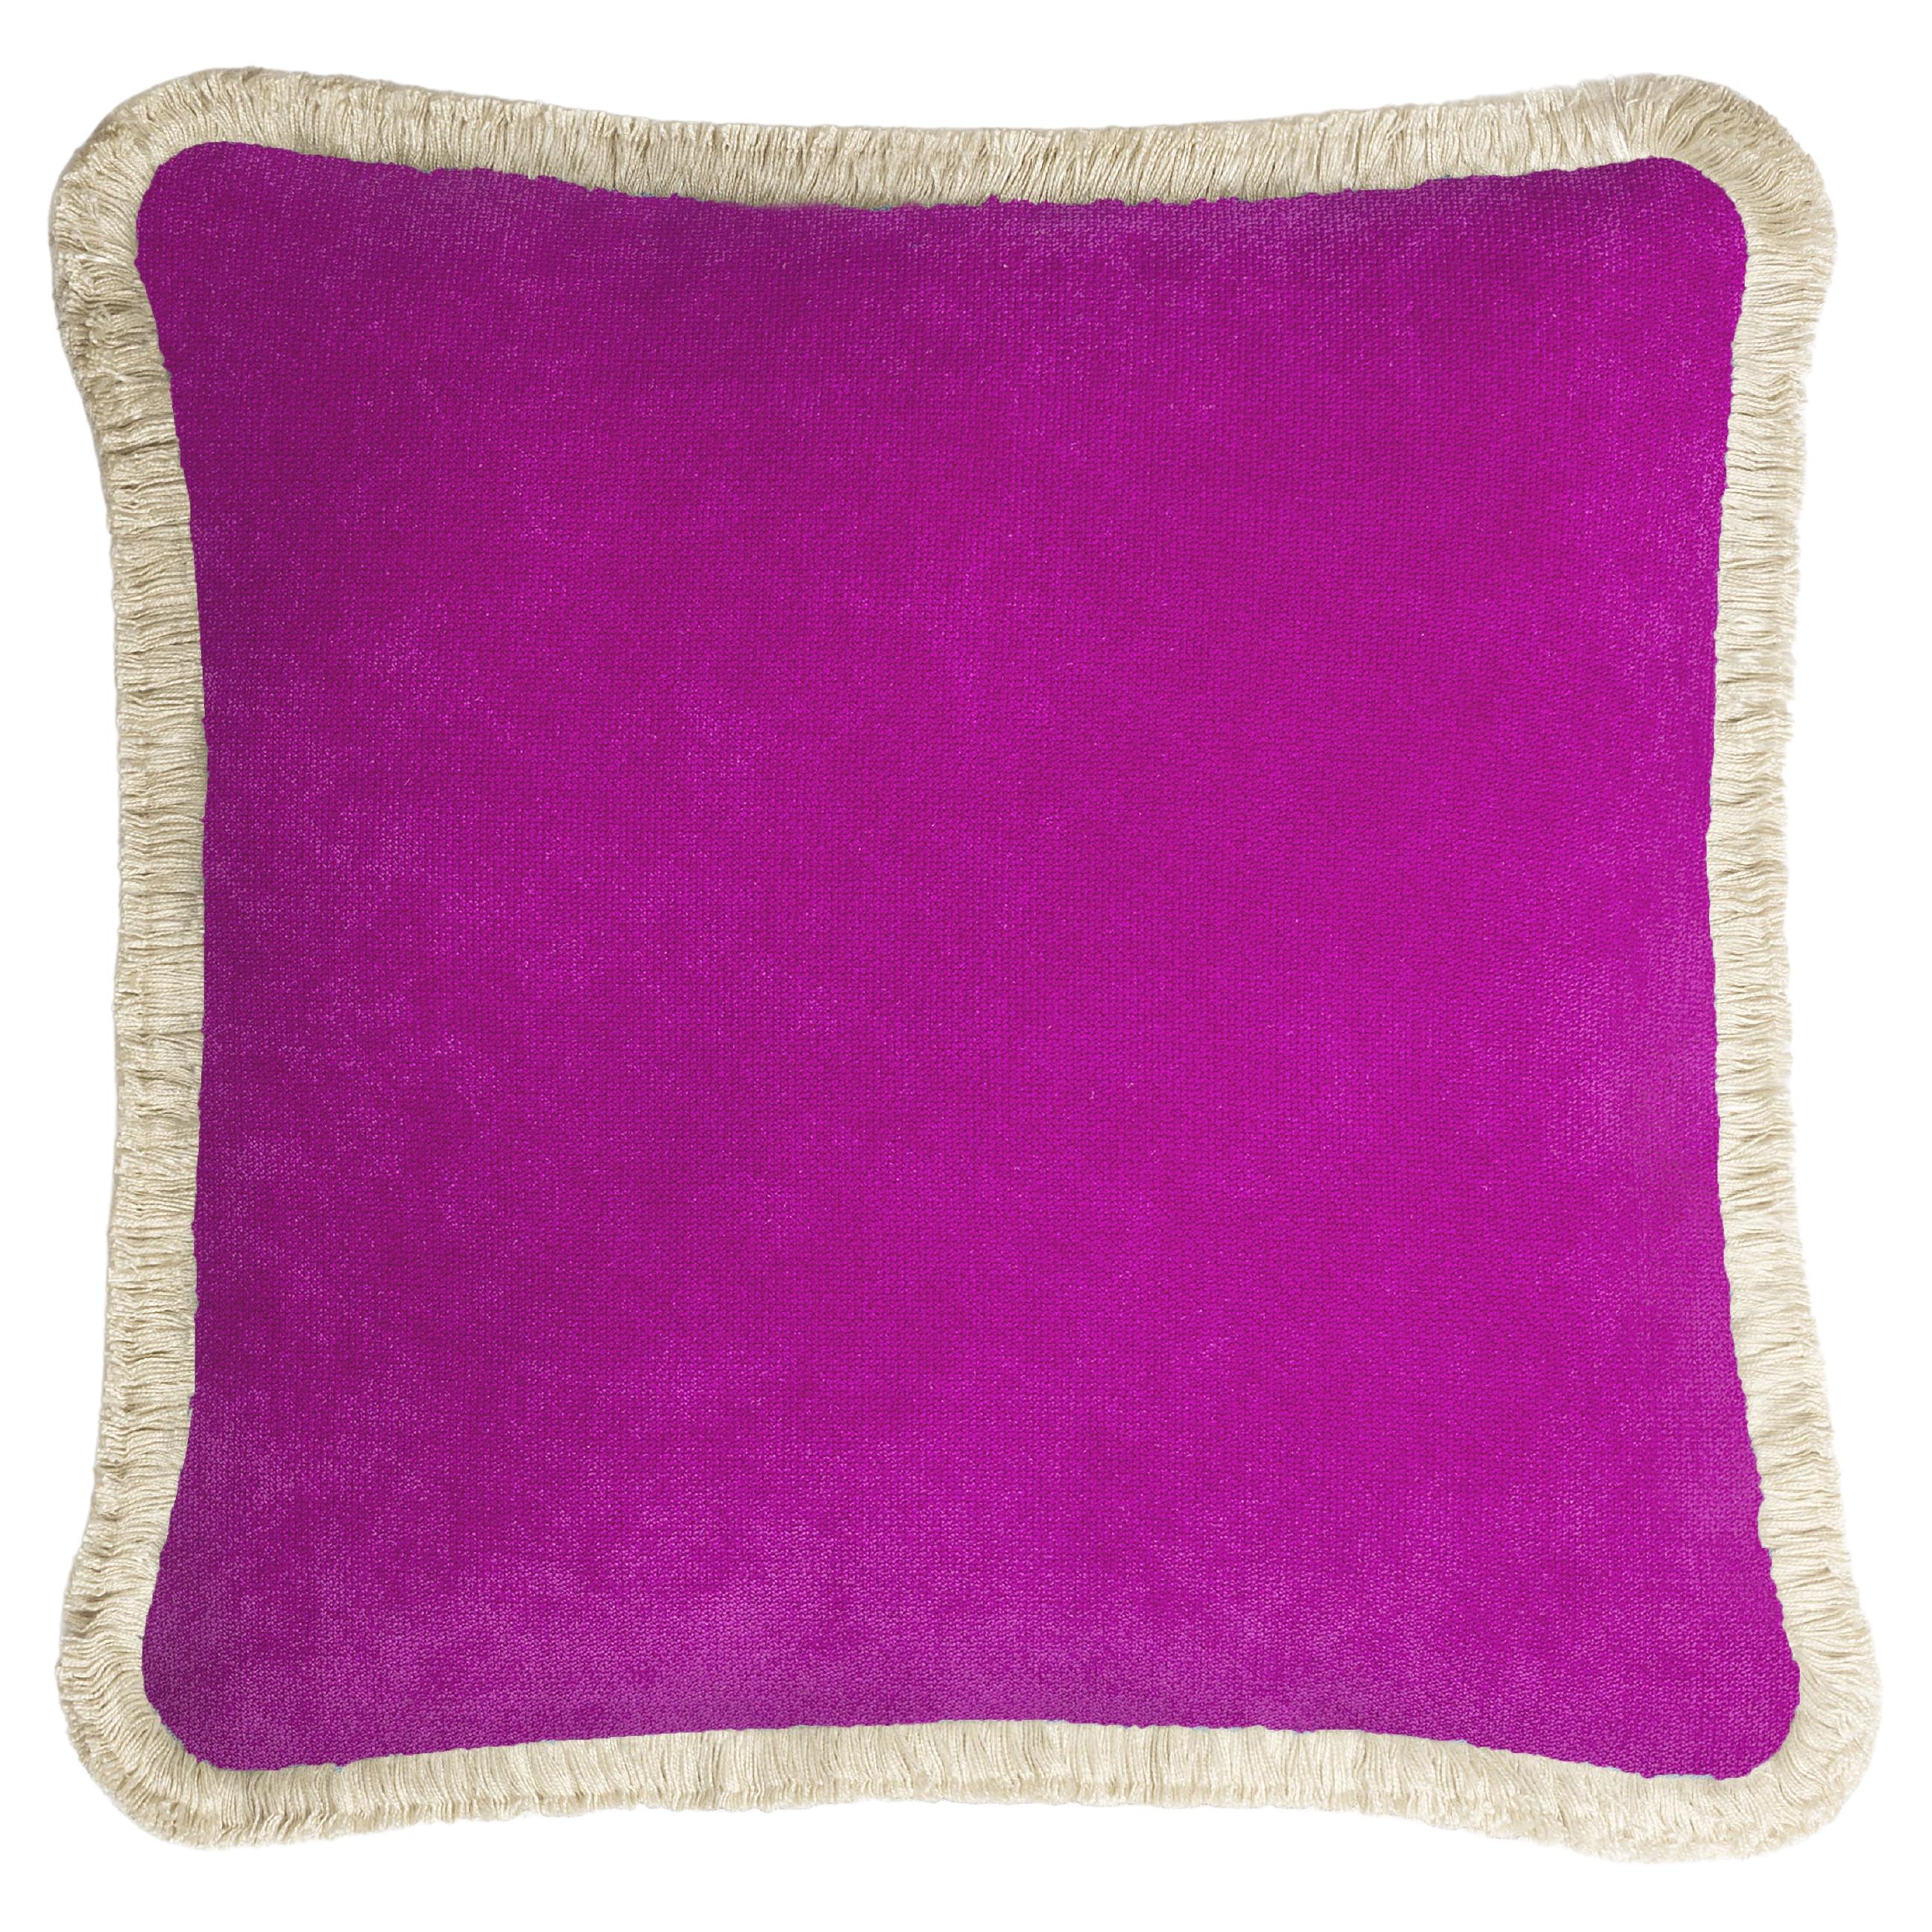 HAPPY PILLOW 40 Velvet Lilac with Cream Fringes For Sale